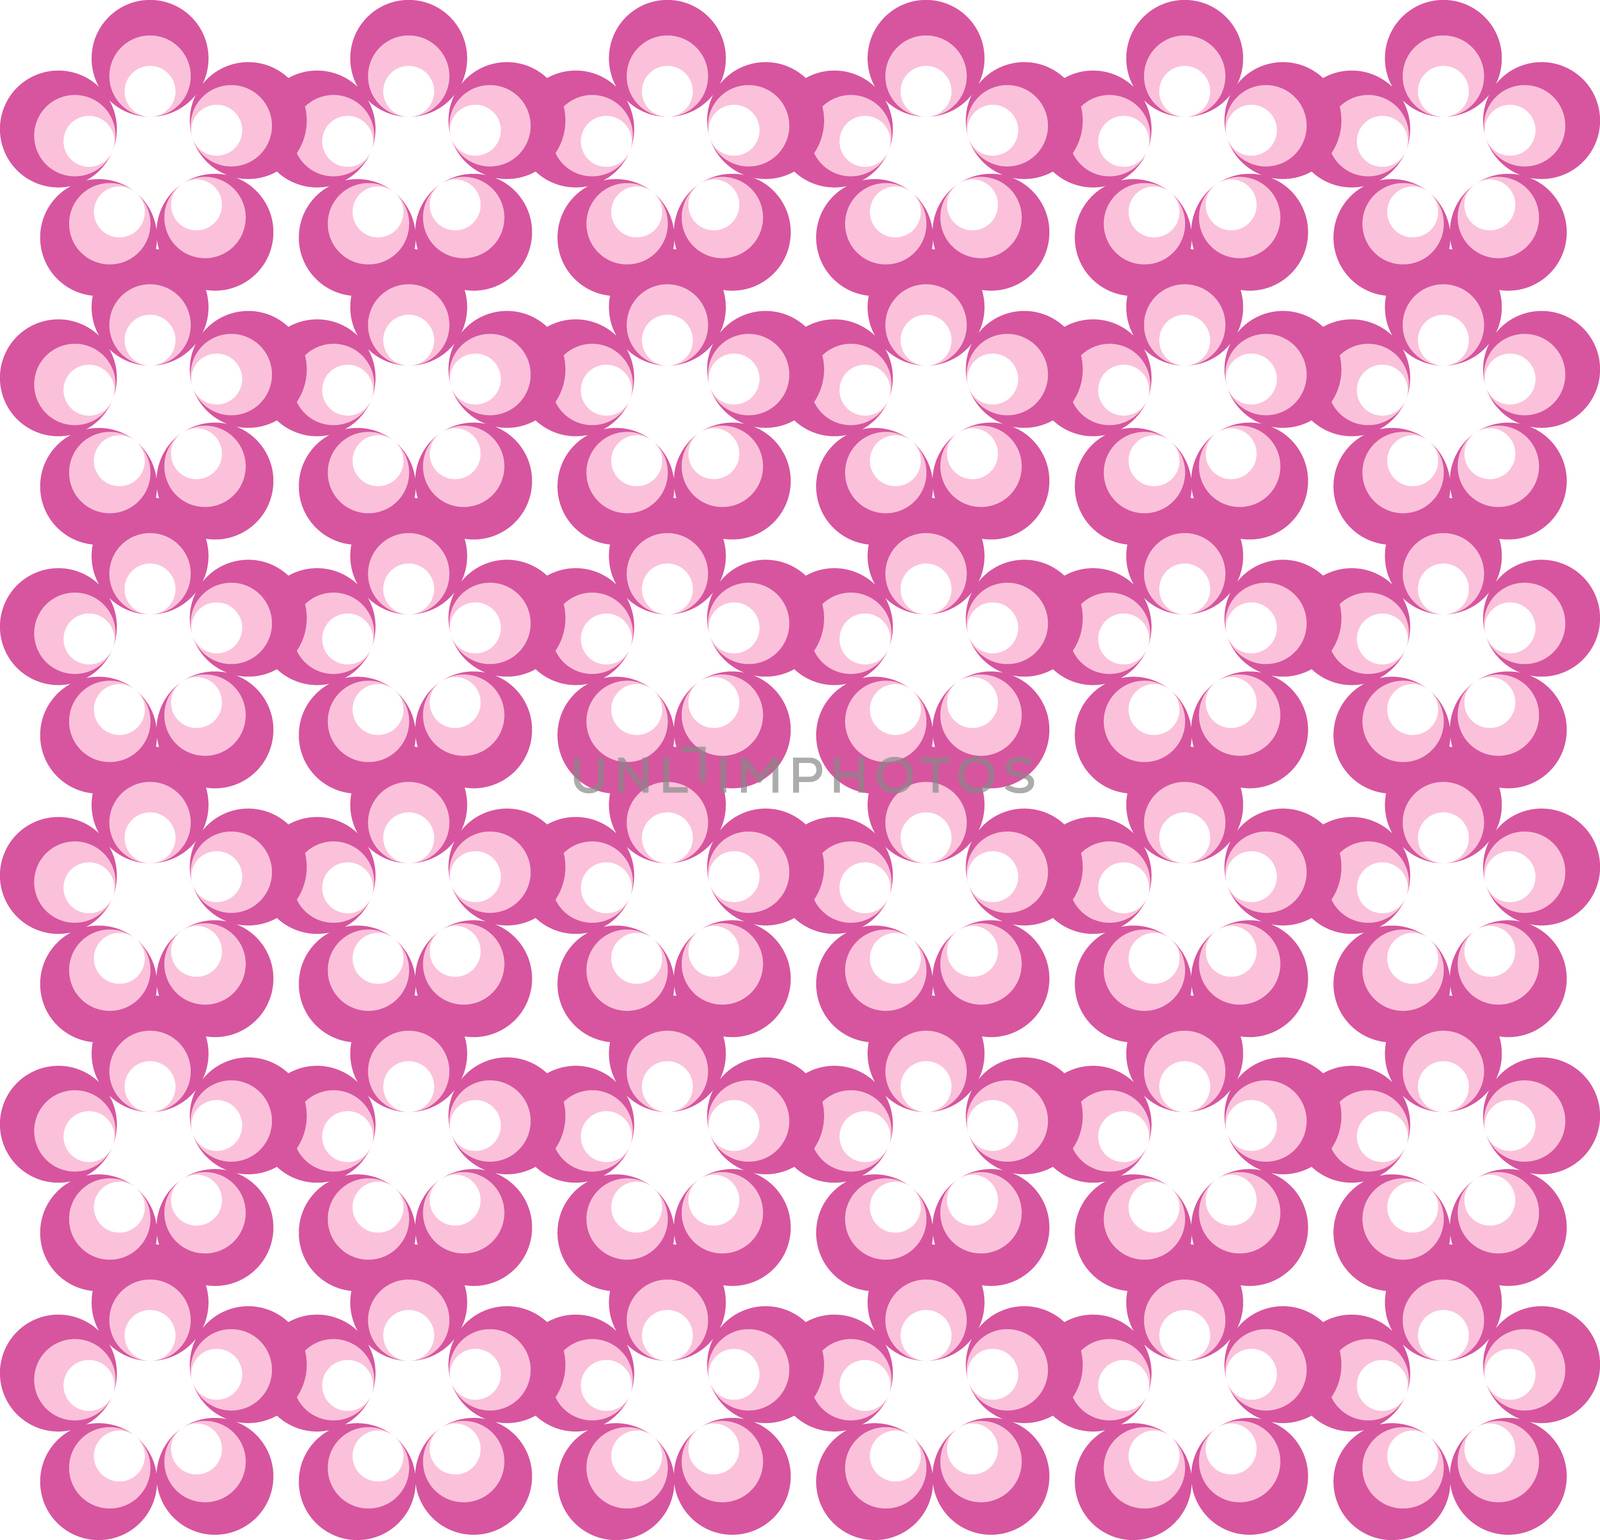 Abstract Flower background, retro design wallpaper by IconsJewelry